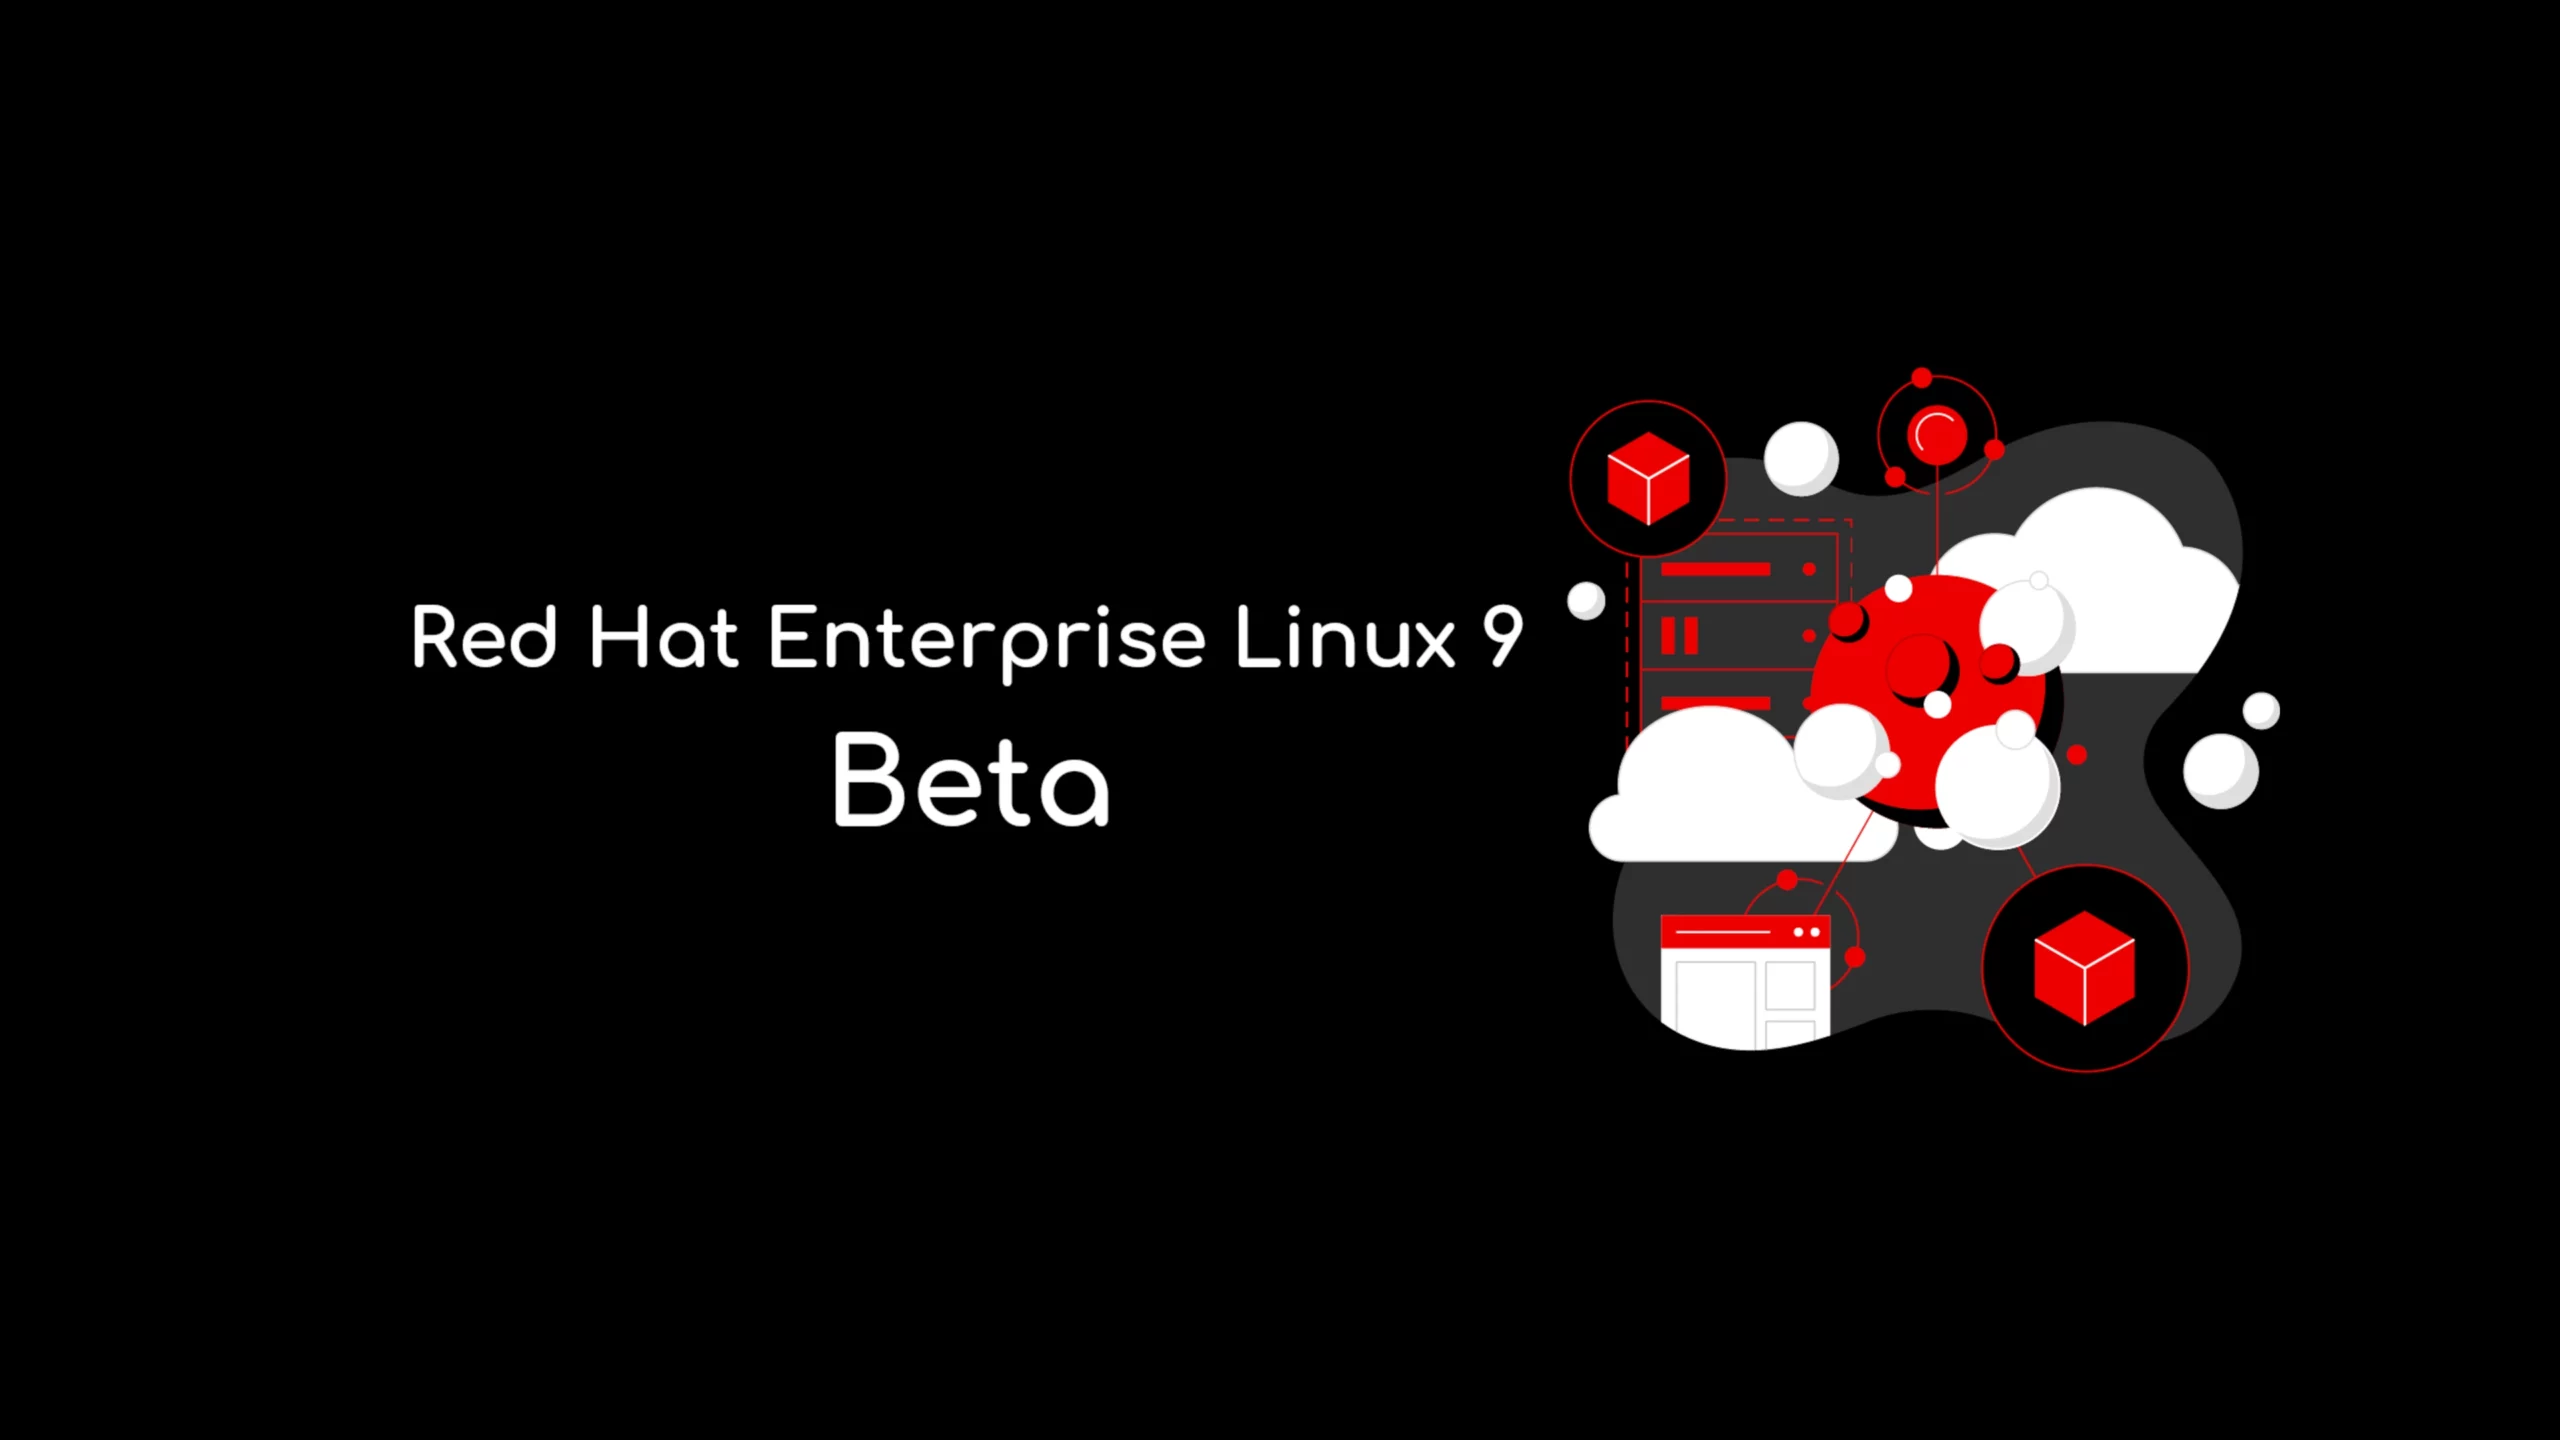 Red Hat Enterprise Linux 9 Enters Beta with Exciting New Features and Many Improvements